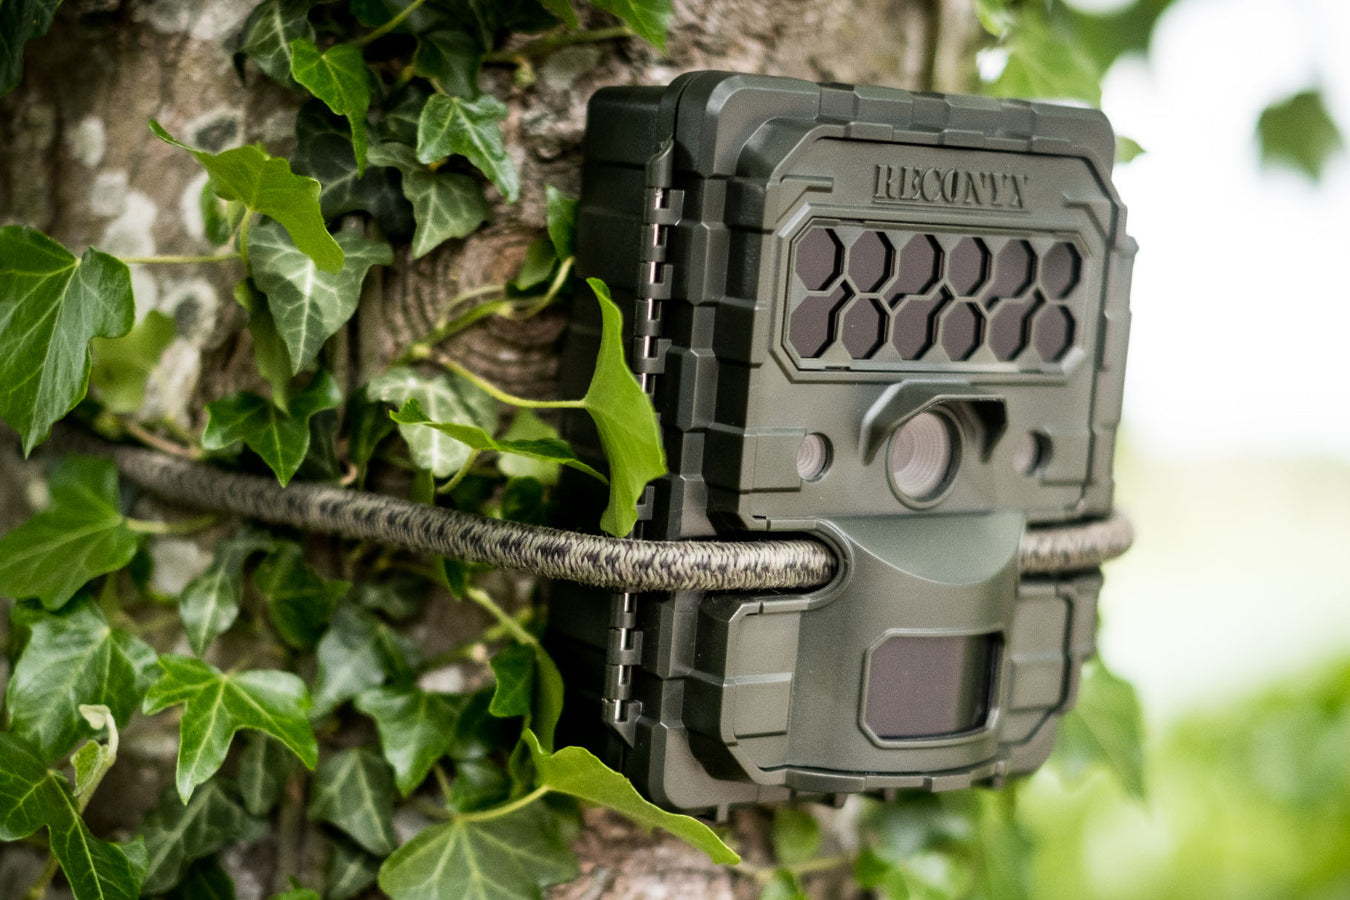 Complete range of Reconyx camera traps for wildlife observation & security available in the UK. Reconyx camera traps are built to last & feature packed. 4G mobile and cellular enabled cameras, standard SD card cameras, No glow, low glow and white flash.